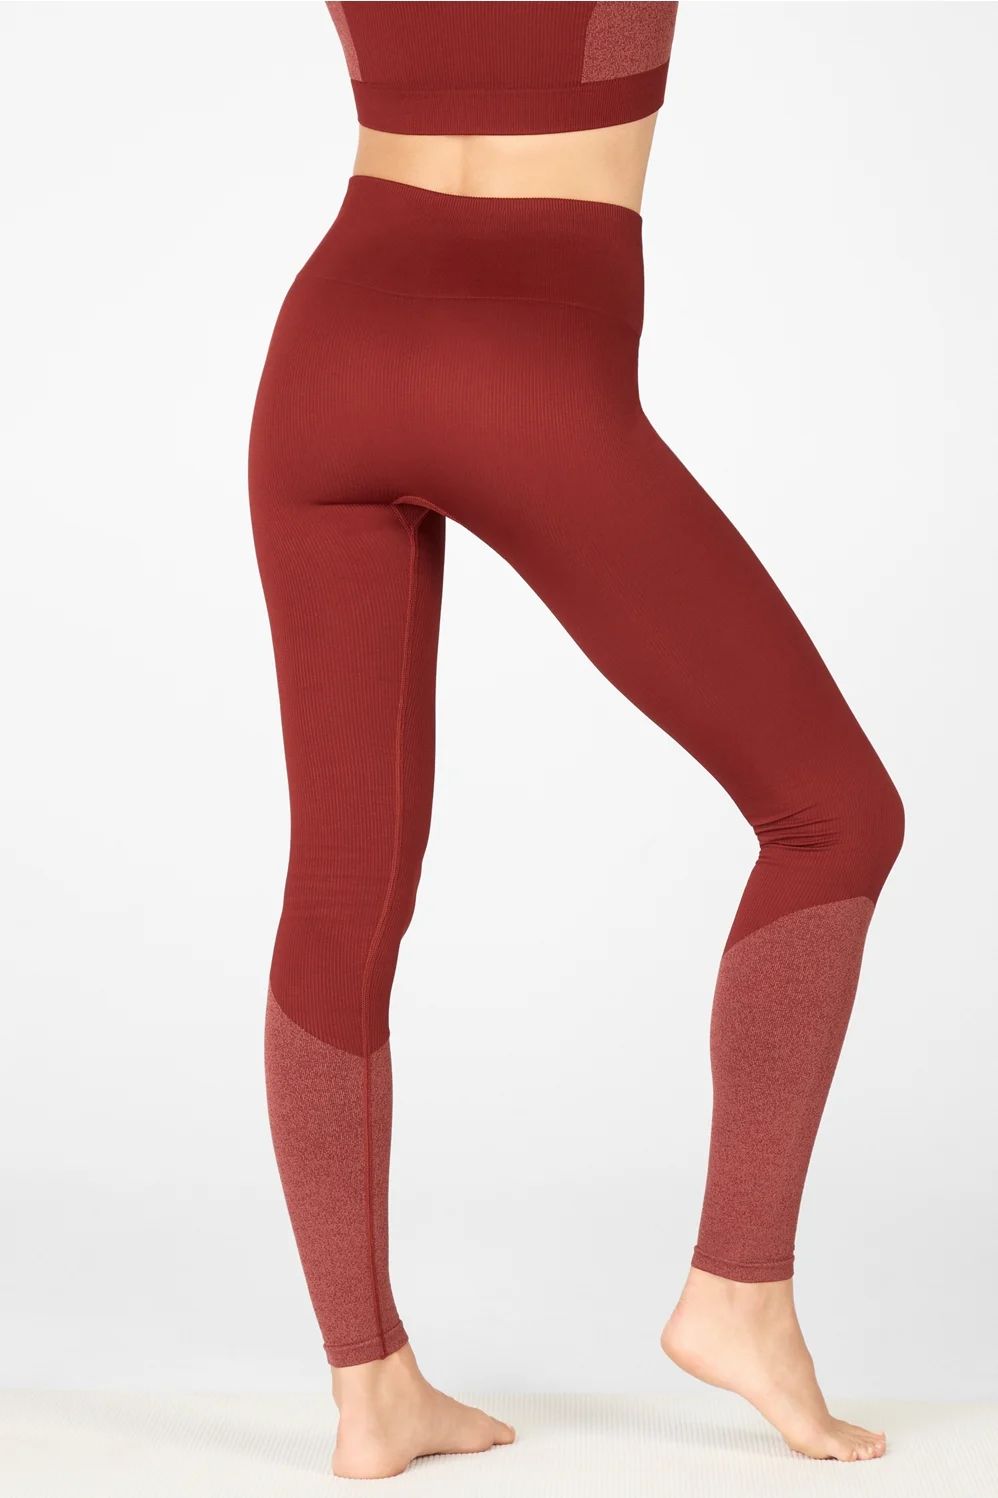 Umbria Red/Pink Buff | Fabletics